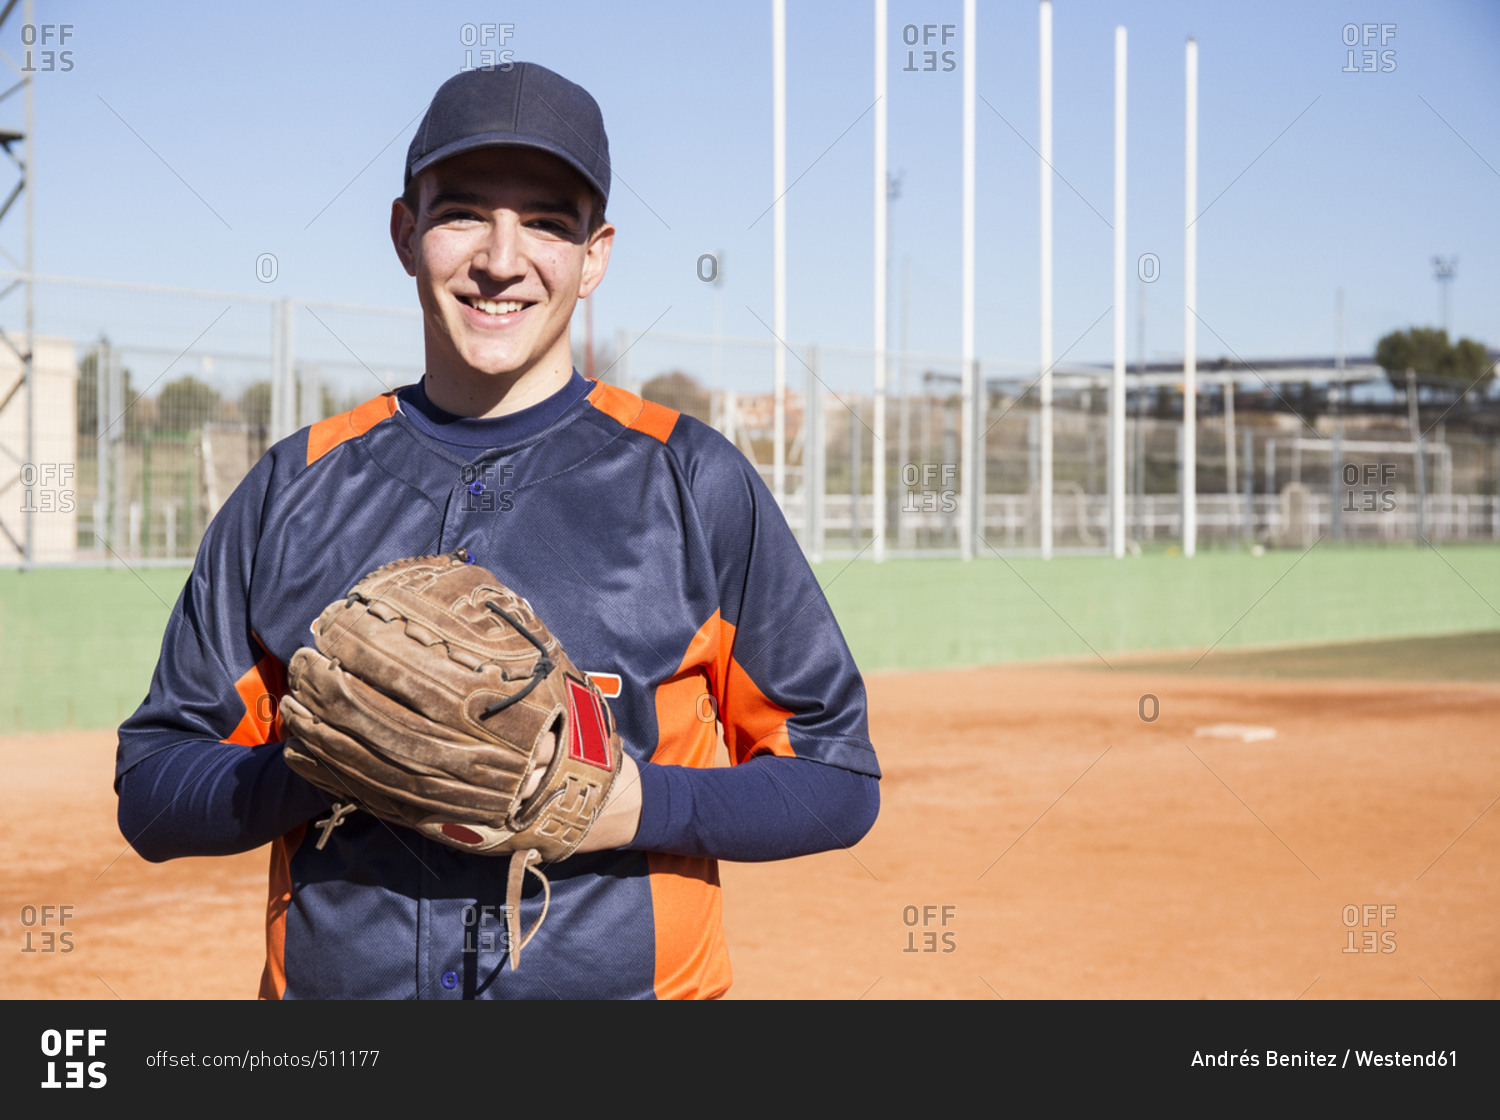 Portrait of smiling baseball player with a baseball glove